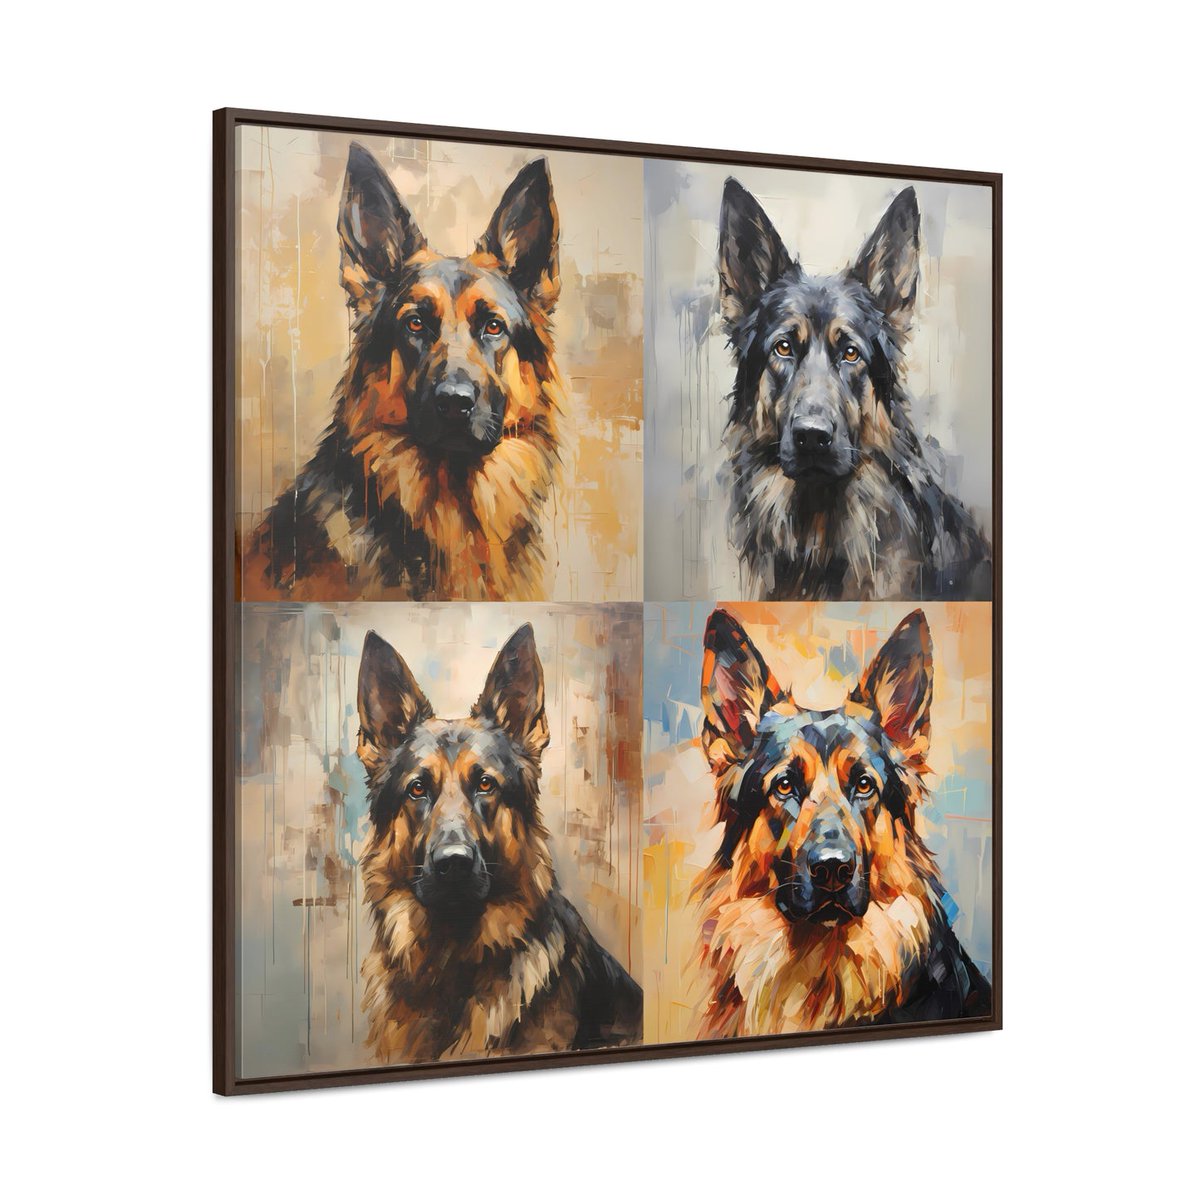 Who loves doggos?

We just started a new unique, framed collection of awesome dog canvas prints, showcasing a variety of breeds and personalities. More to come!

visualintensity.com/collections/fr…

#doggo #doggos #dogart #canvasart #wallart #framedart #quadtych #visualintensity